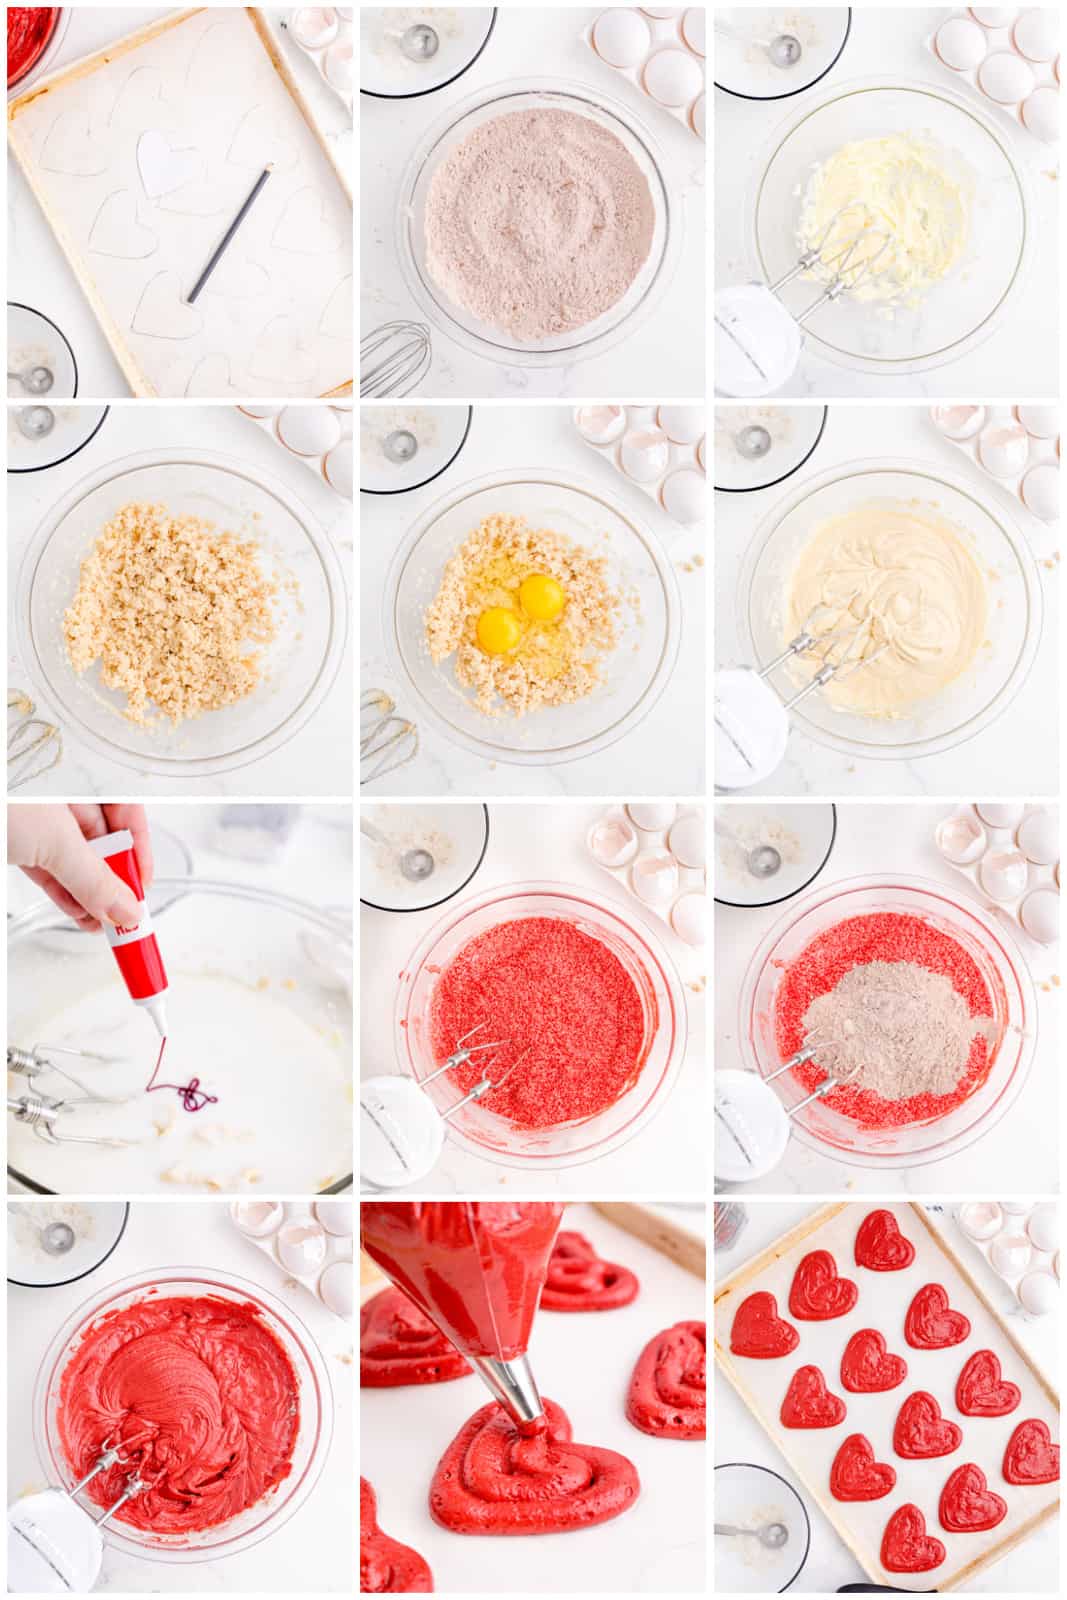 Step by step photos on how to make Red Velvet Whoopie Pies.